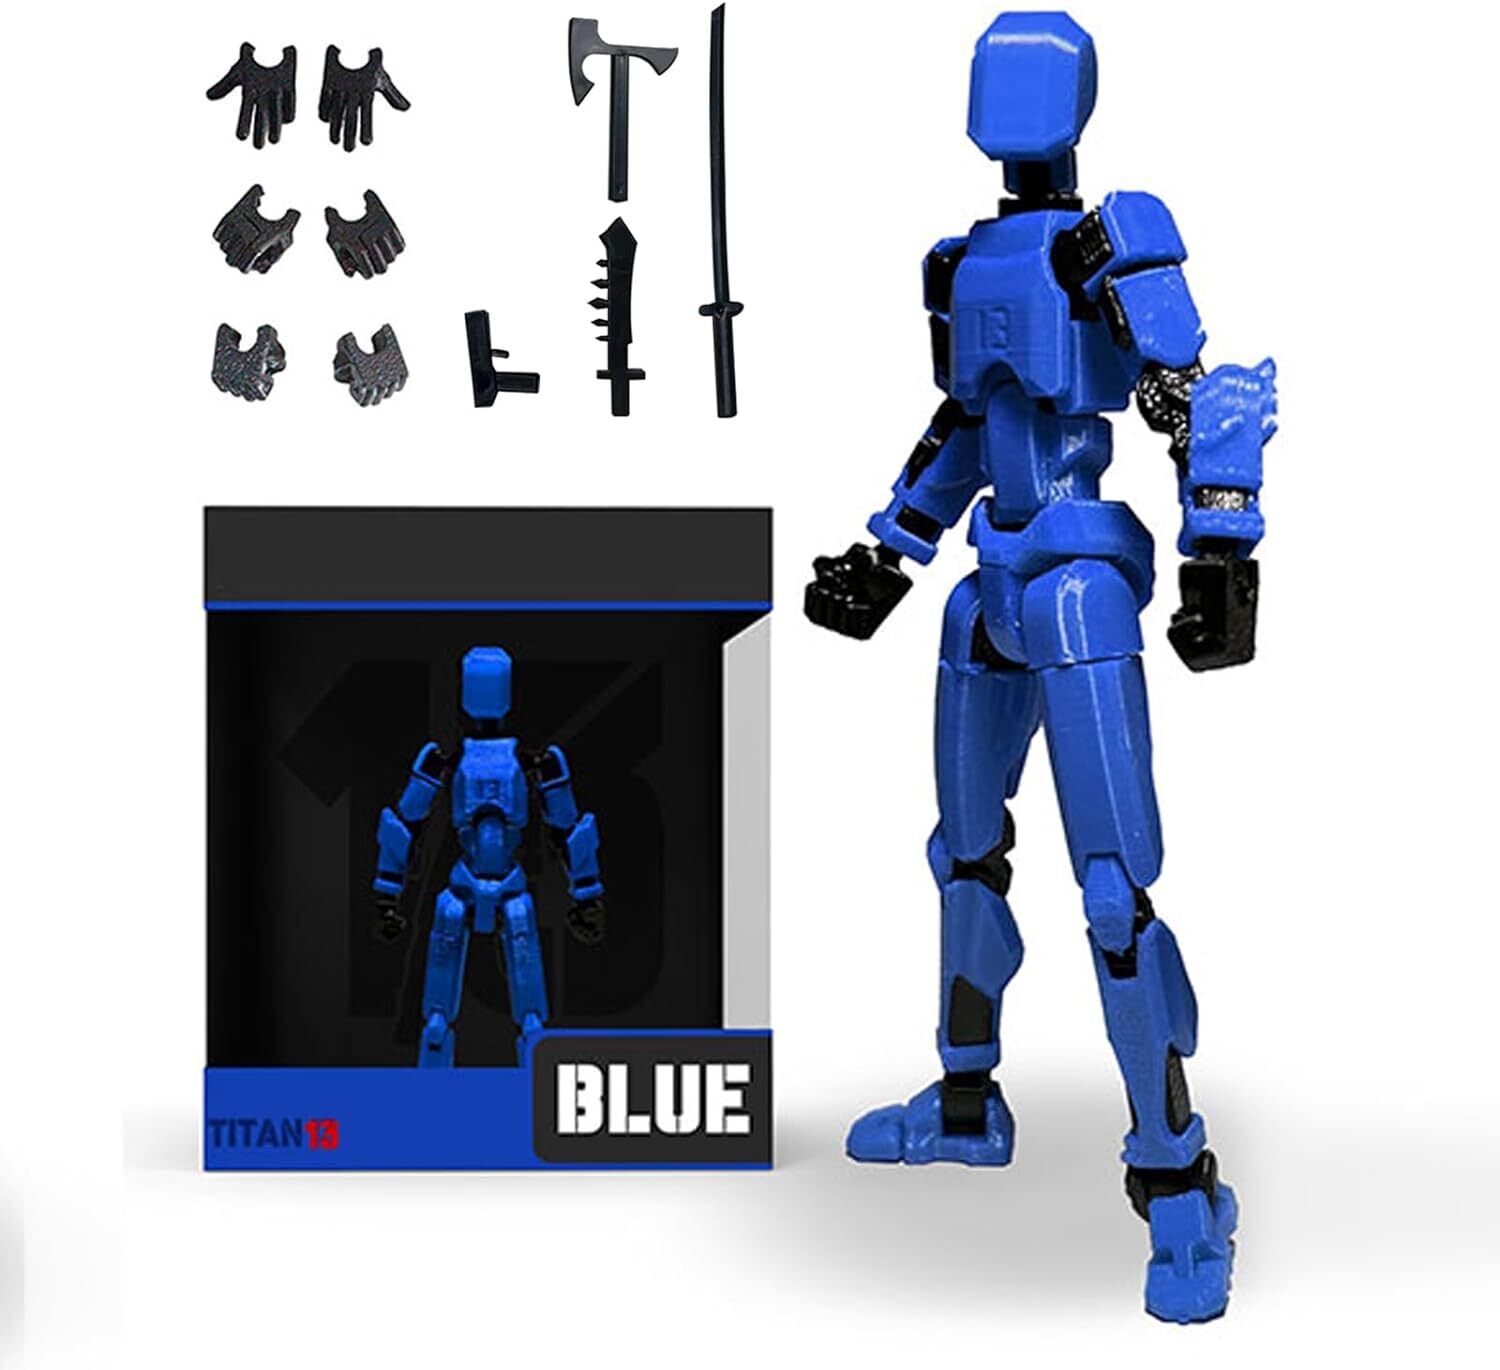 T13 Action Figure,Titan 13 Action Figure Toy Robot,3D Printed Jointed Movable